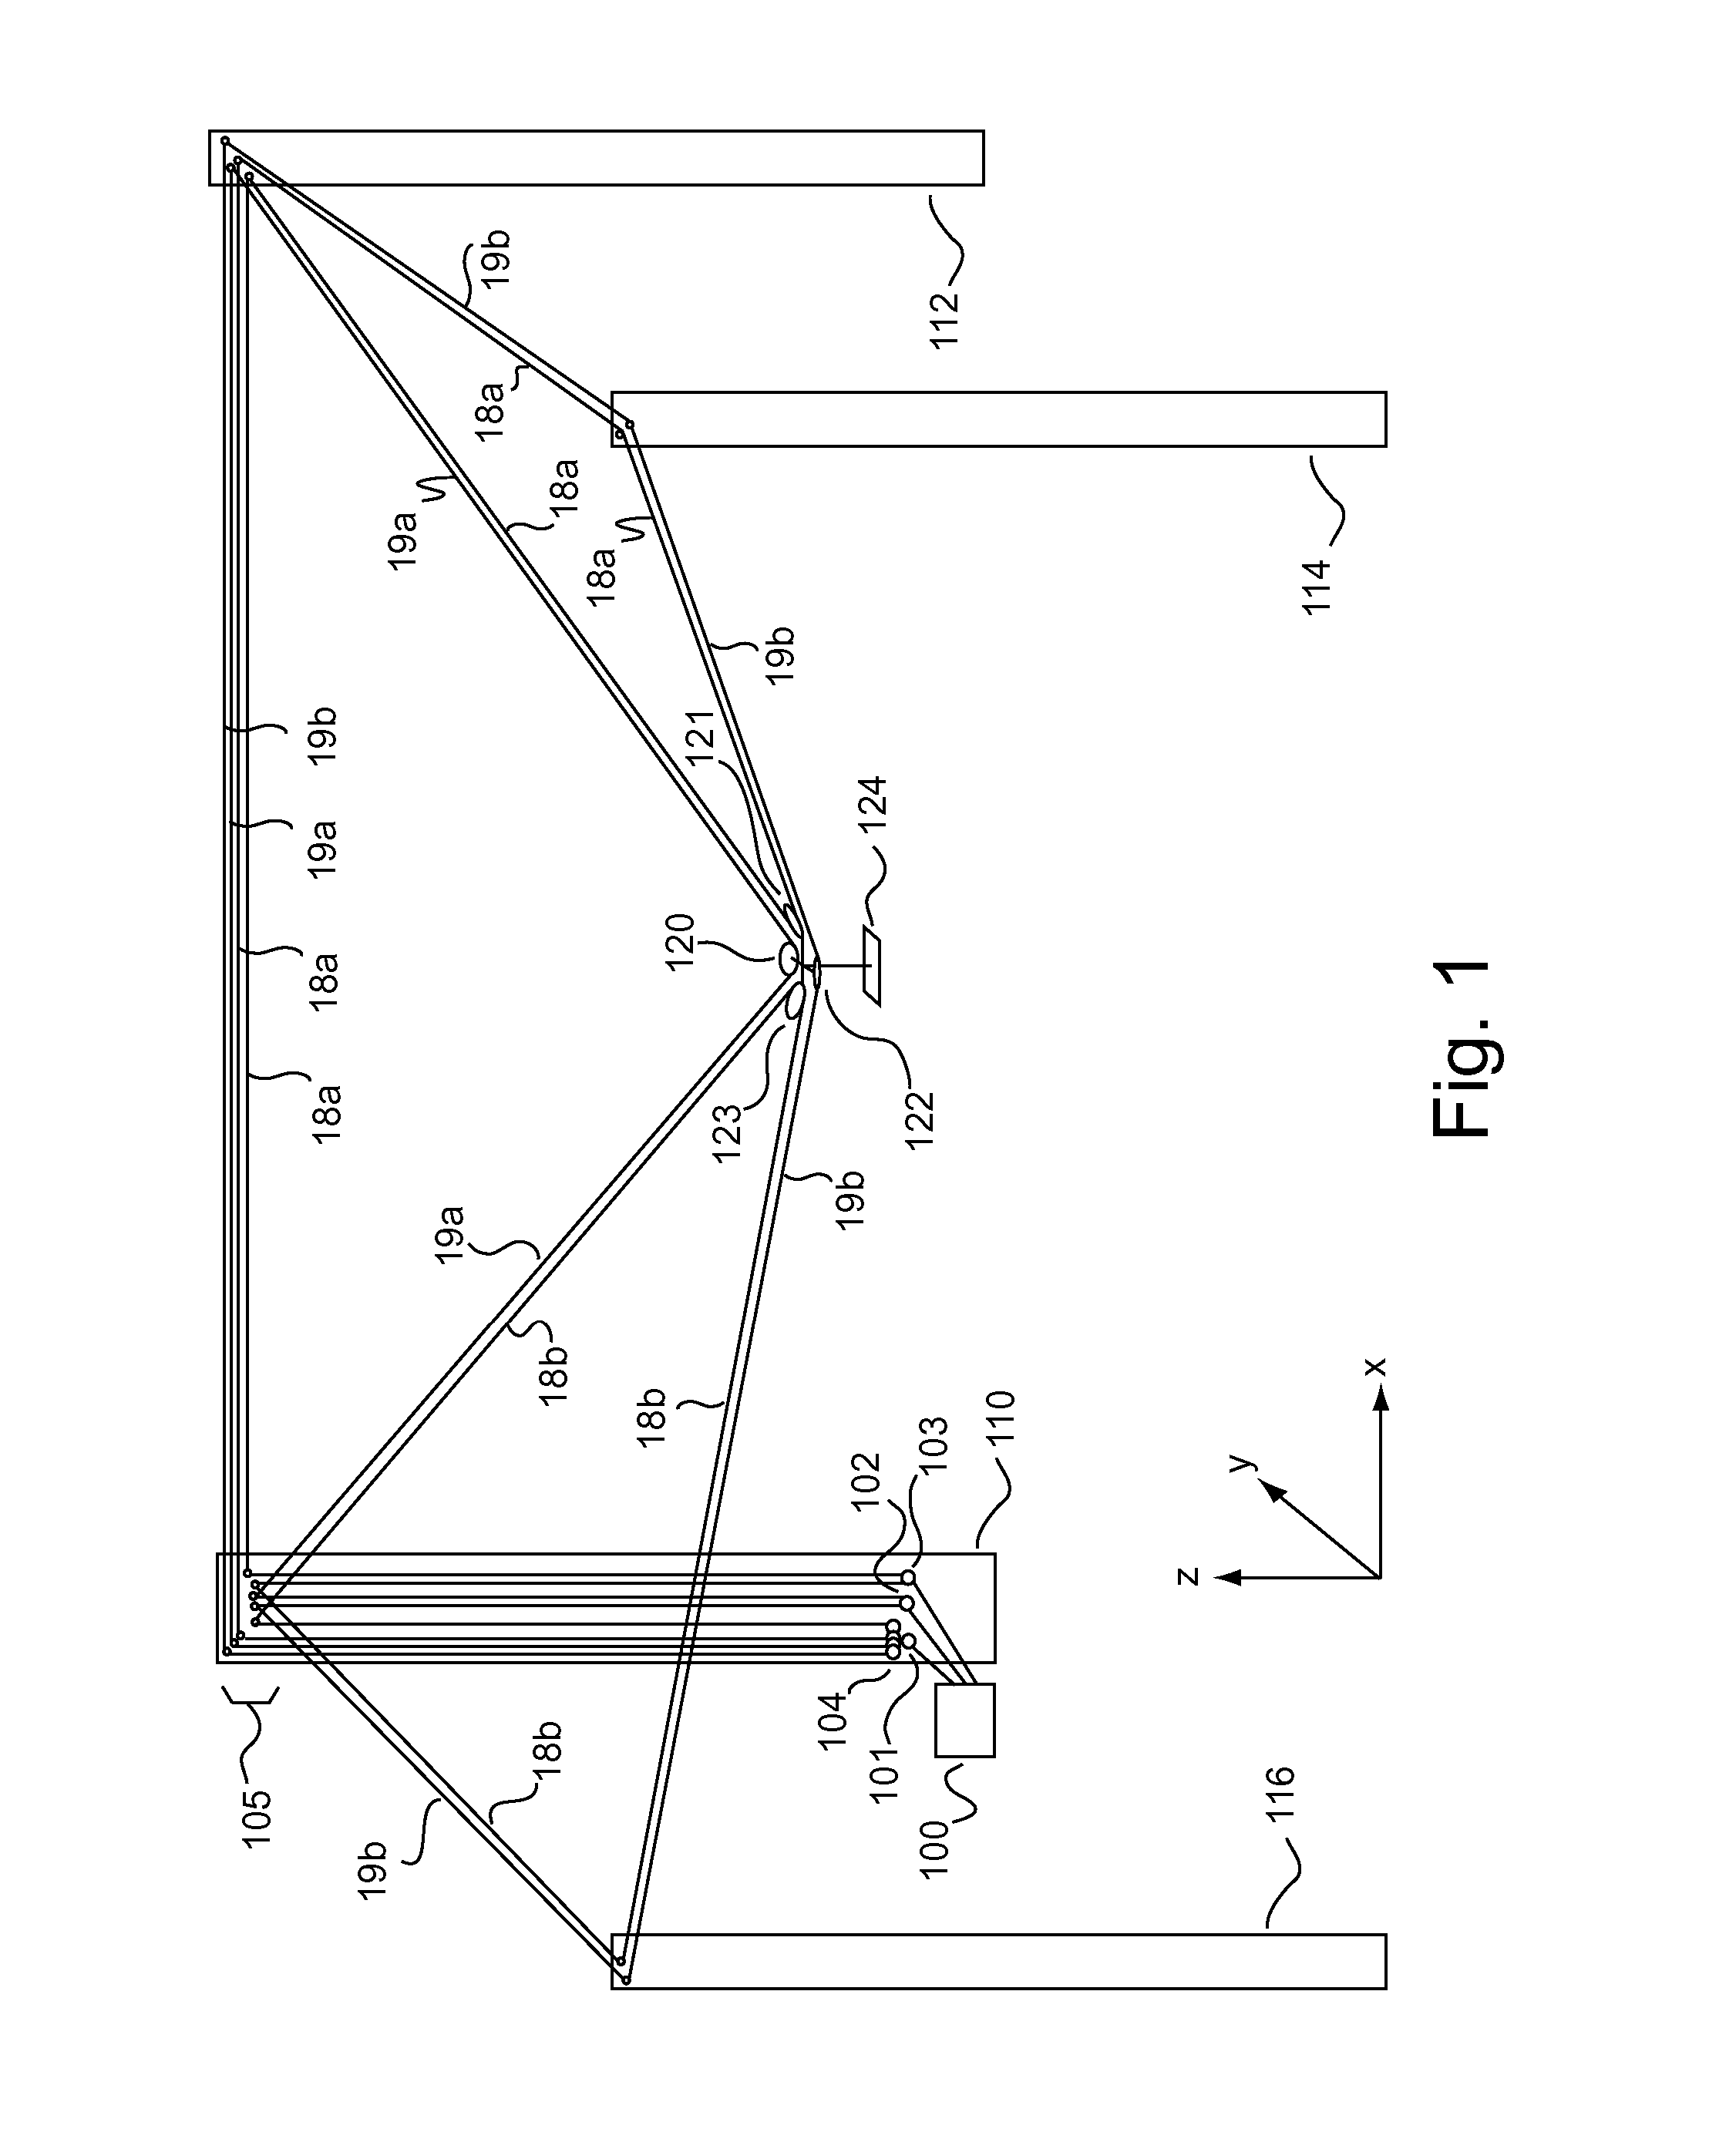 Cabling system and method for facilitating fluid three-dimensional movement of a suspended camera